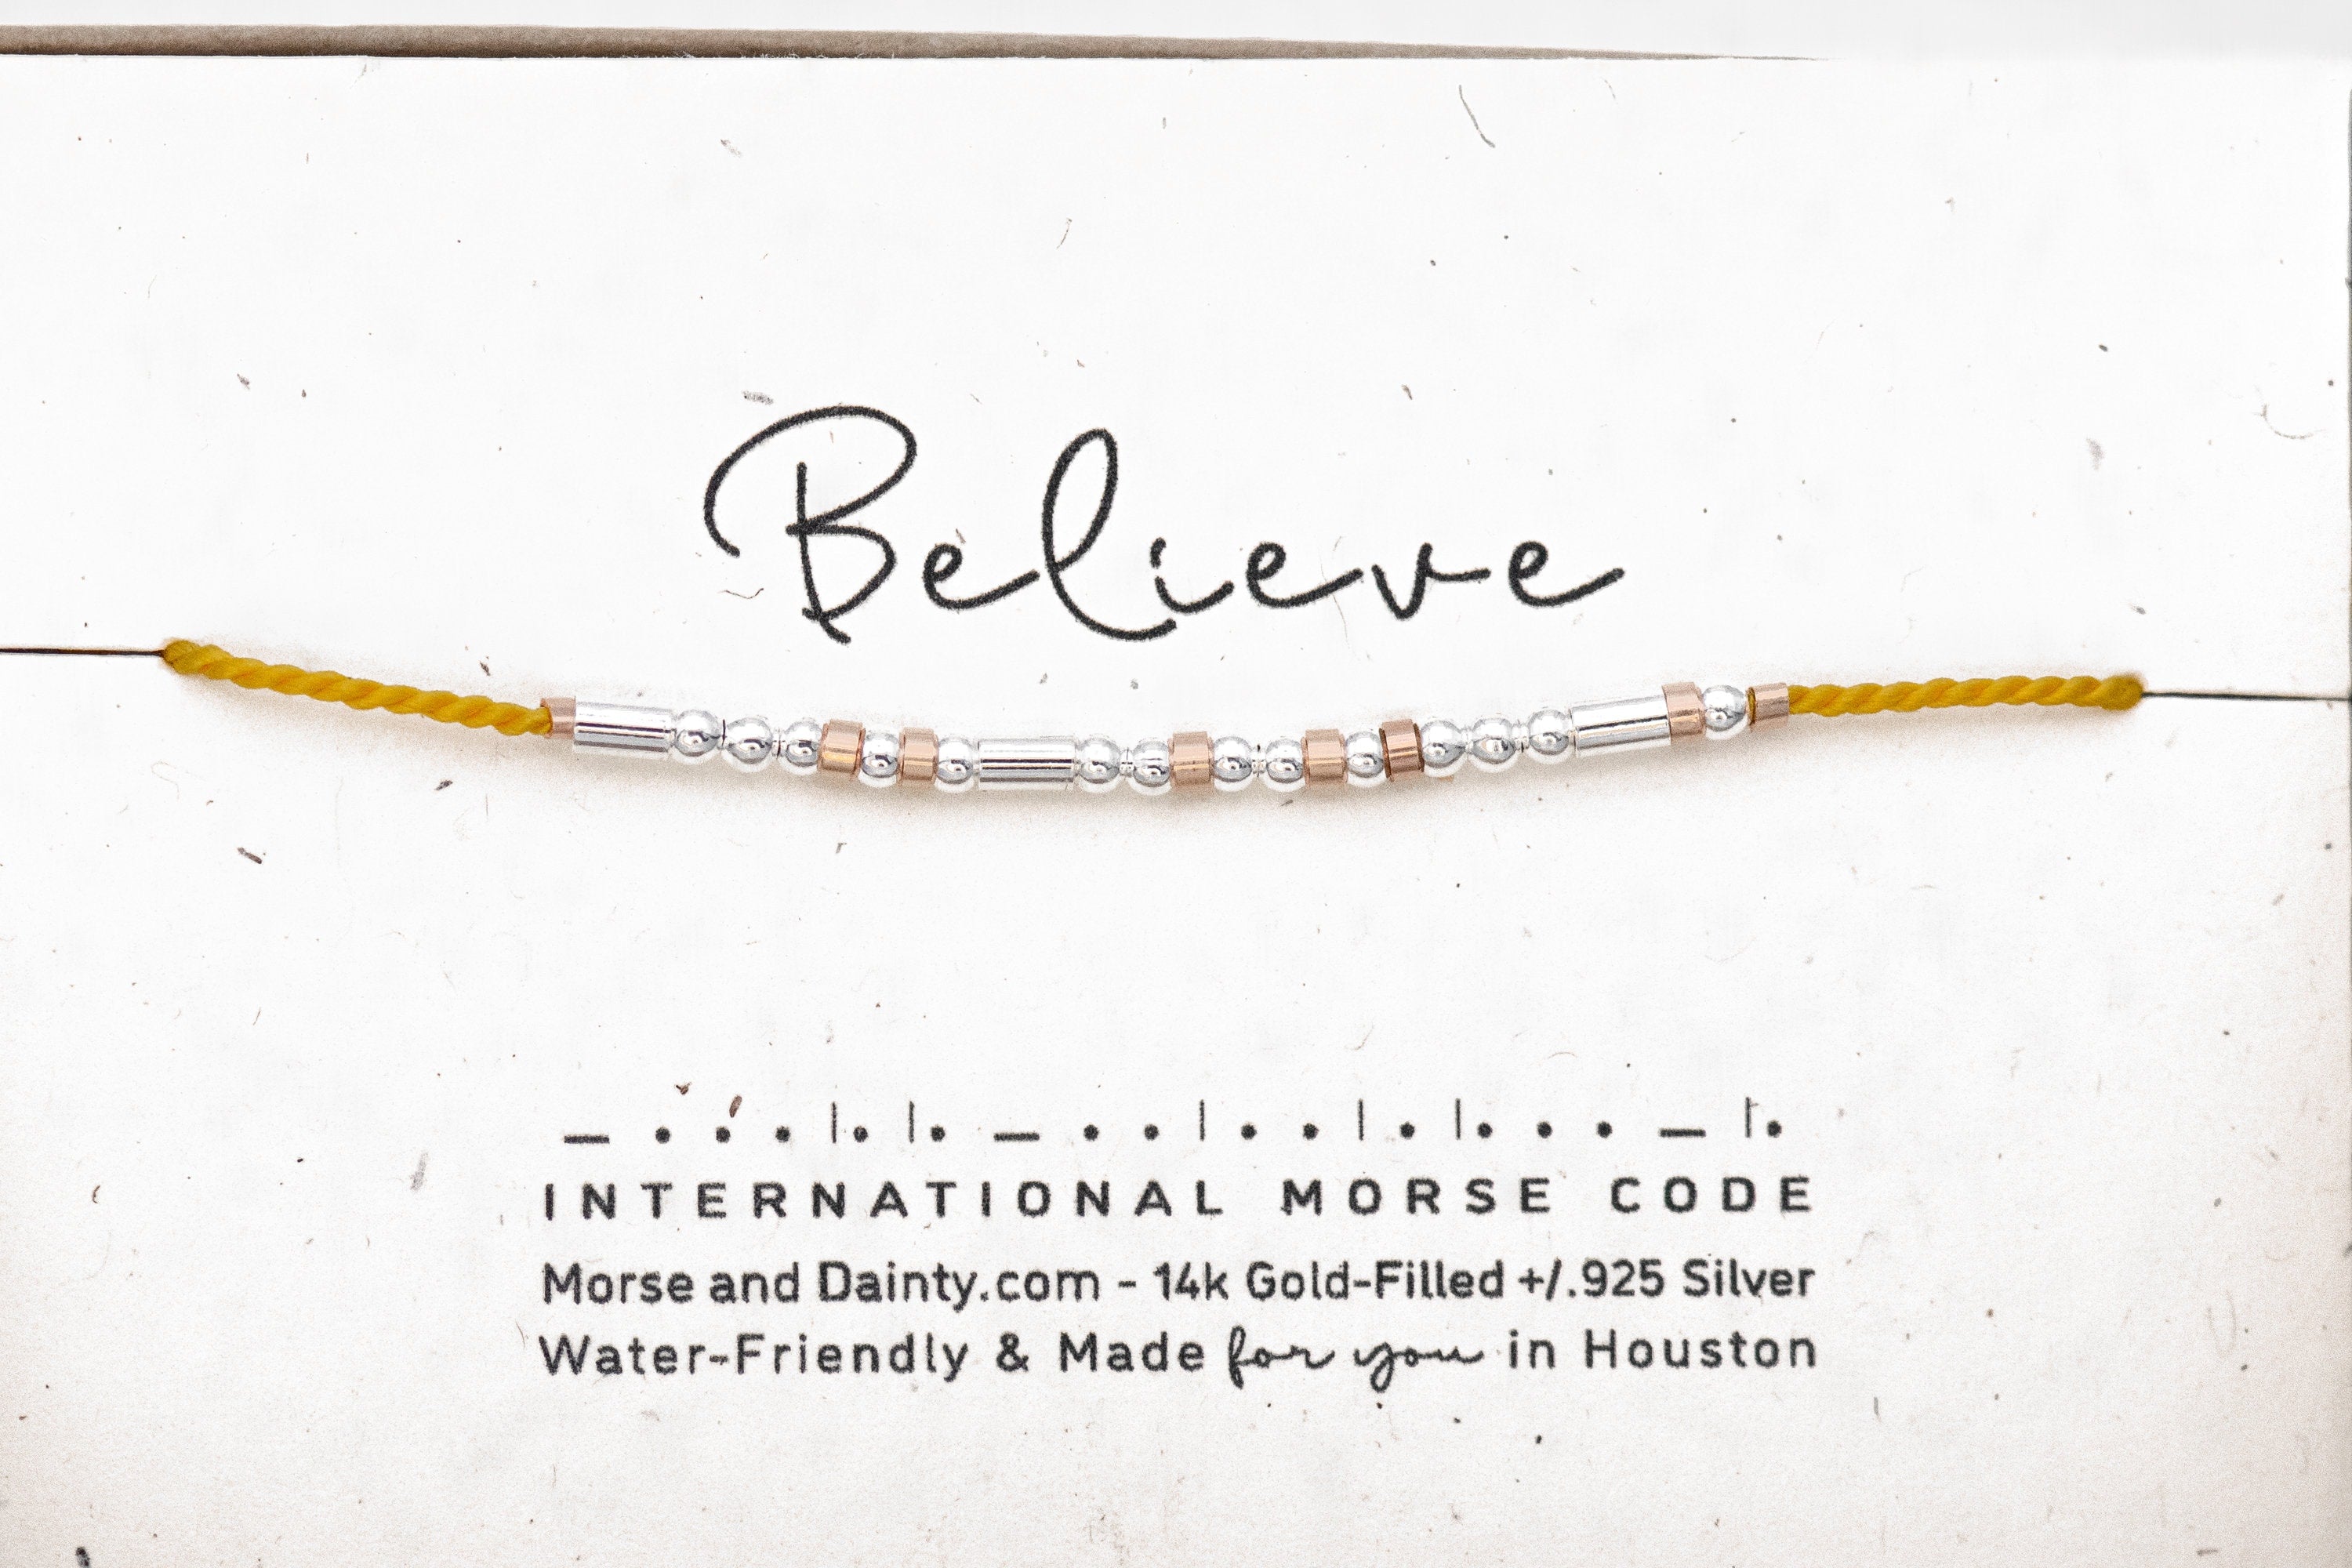 Believe Morse Code Bracelet on Yellow Cord. Reminder Motivational Token for Encouragement to Believe. Don't Give Up, Have Faith